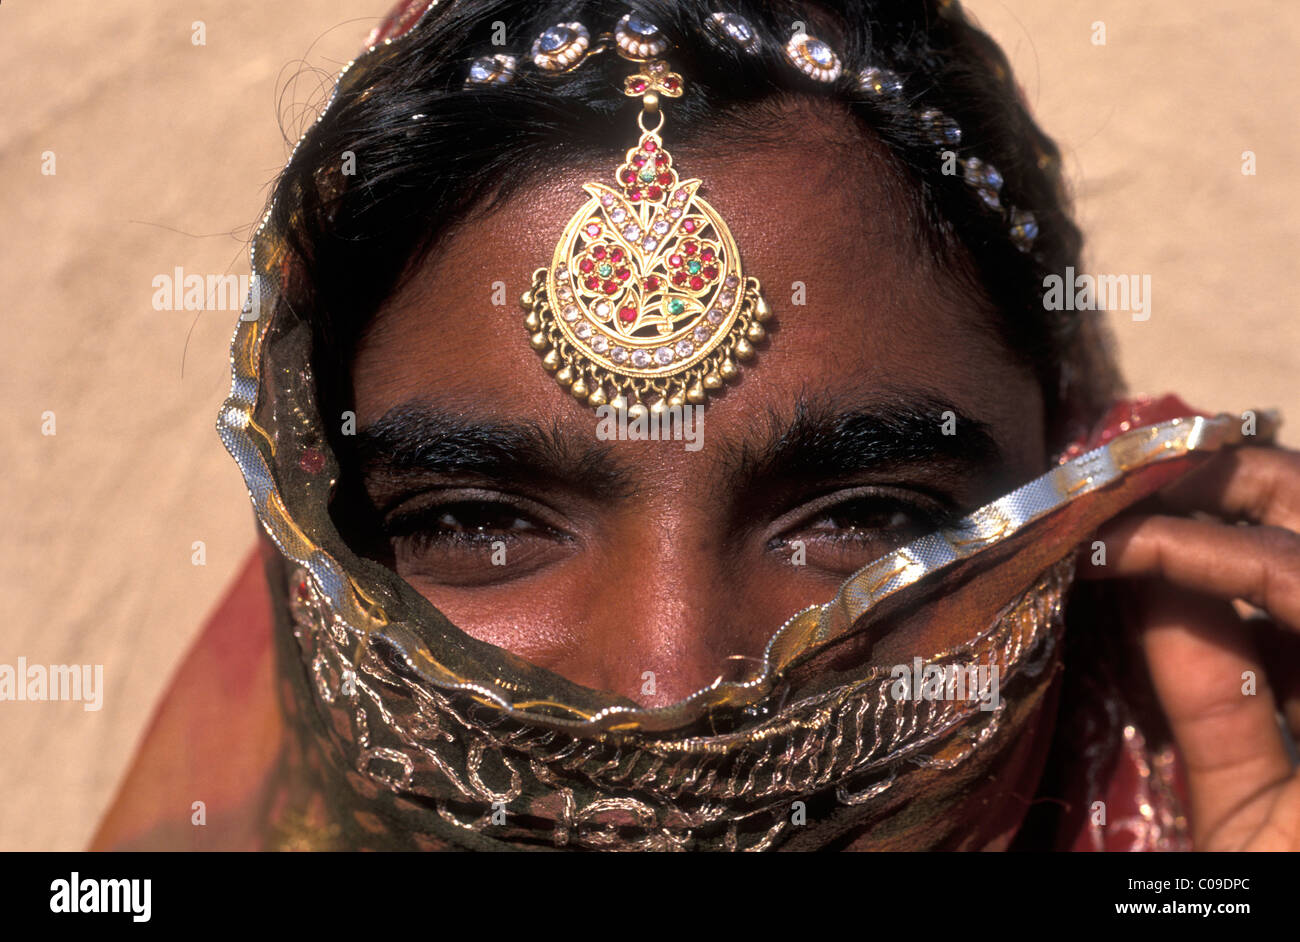 Portrait of a young woman with jewelry, Thar Desert, Rajasthan, India, Asia Stock Photo